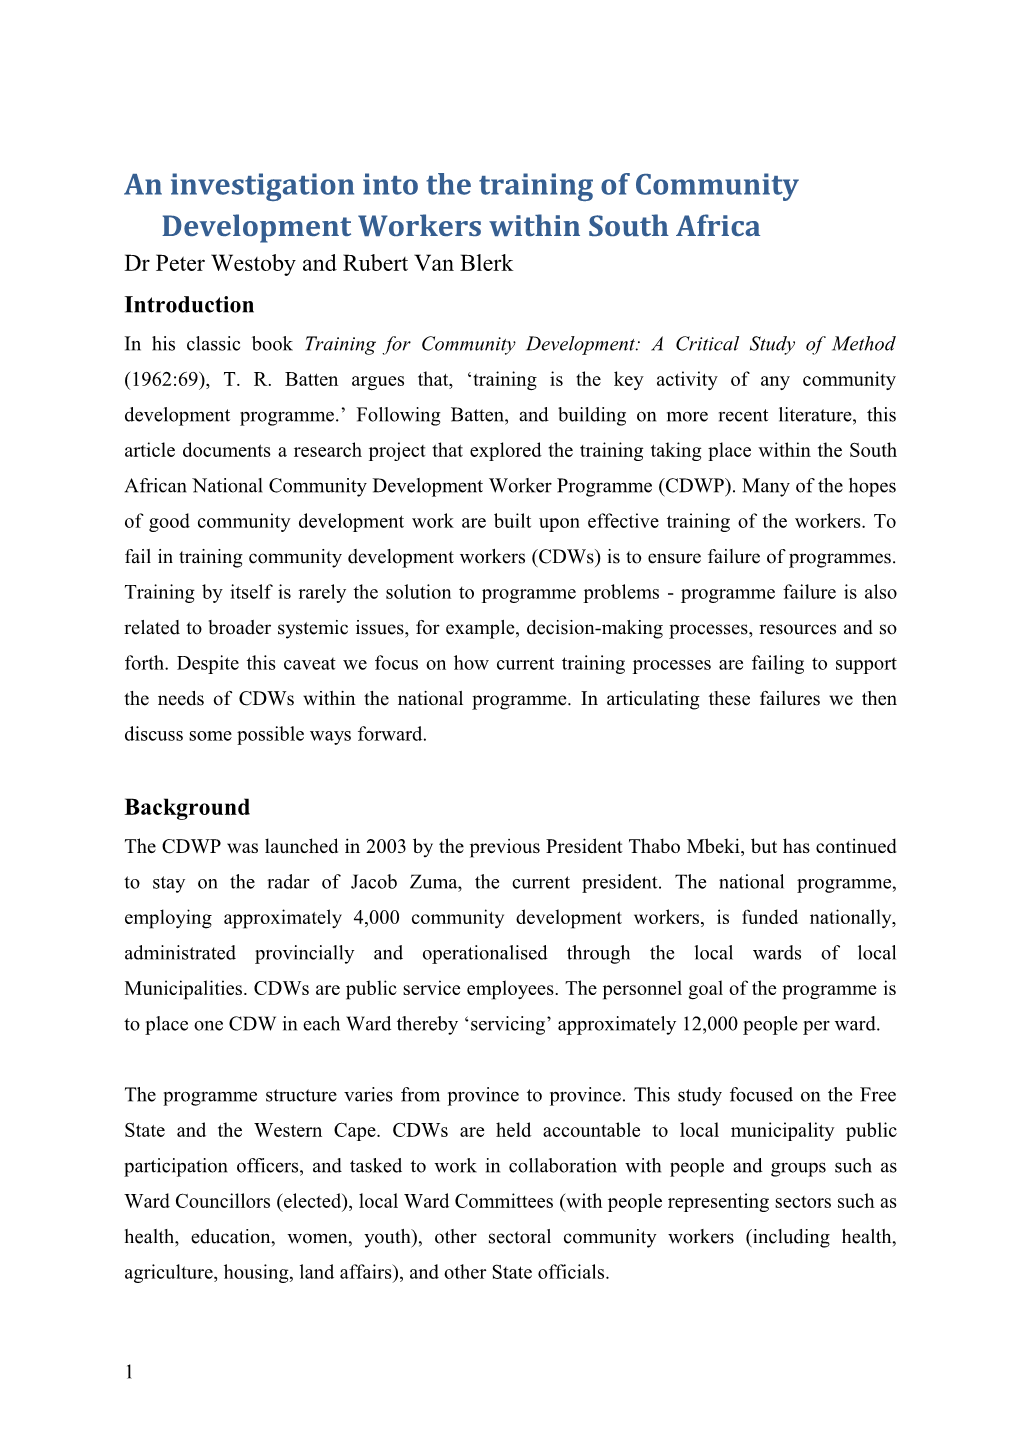 An Investigation Into the Training of Community Development Workers Within South Africa